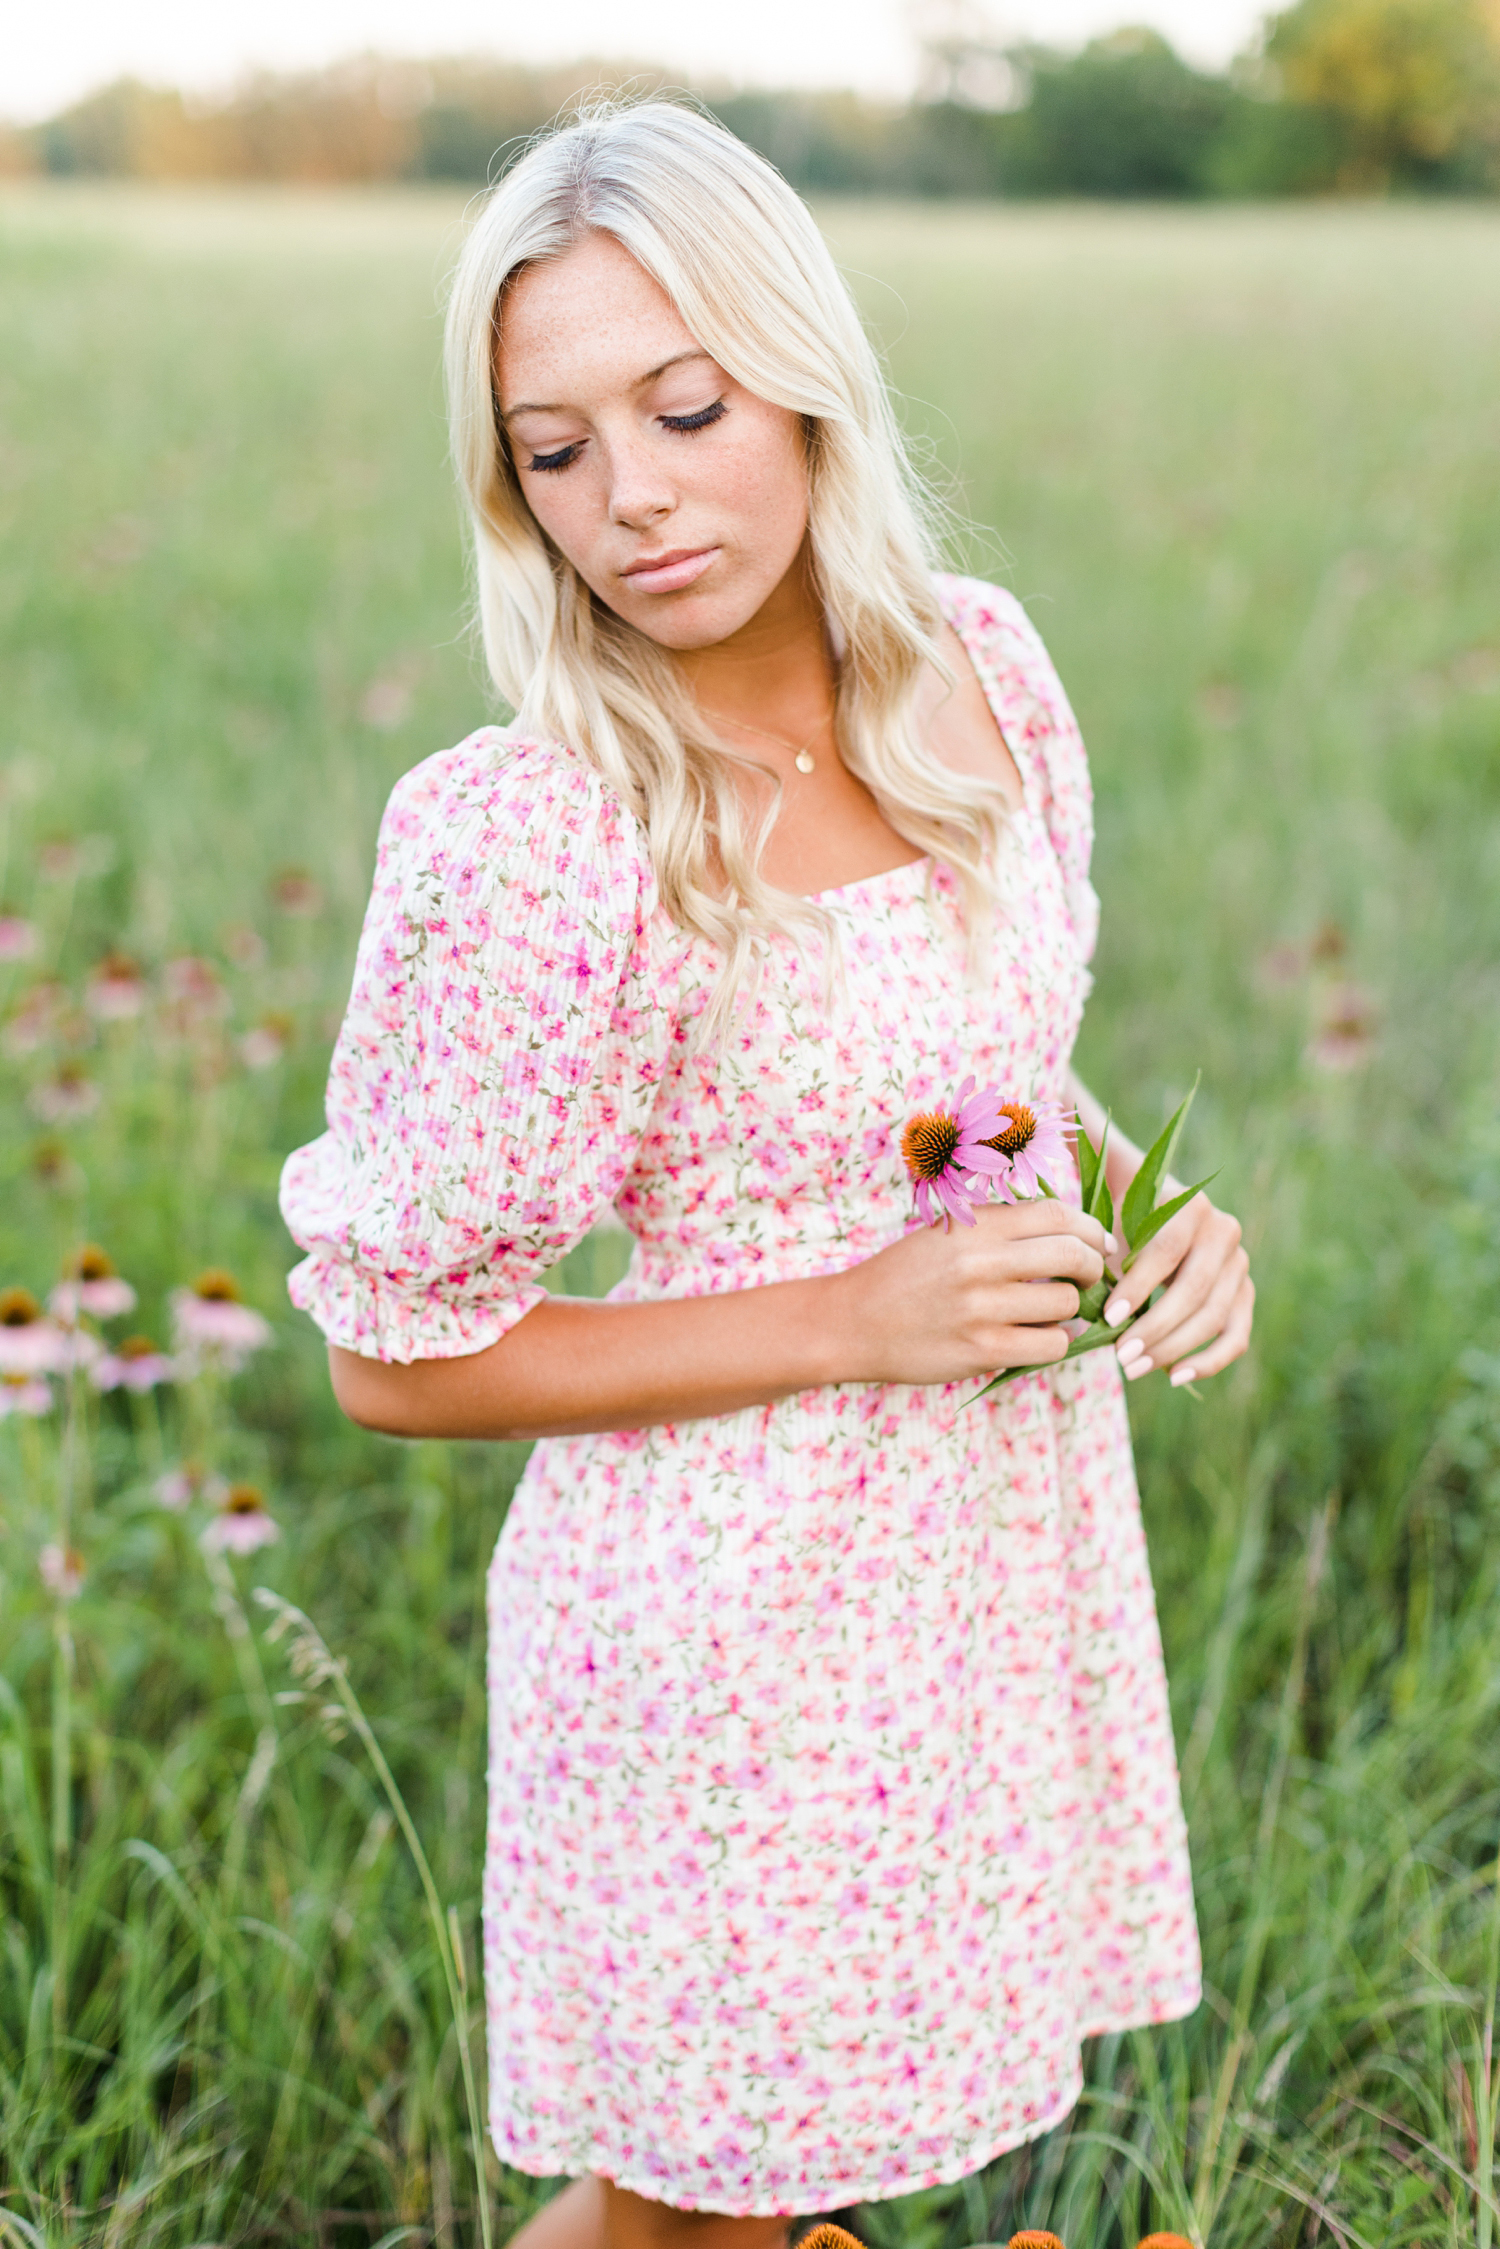 Shelby poses in a pink wildflower field wearing a pink floral dress | CB Studio